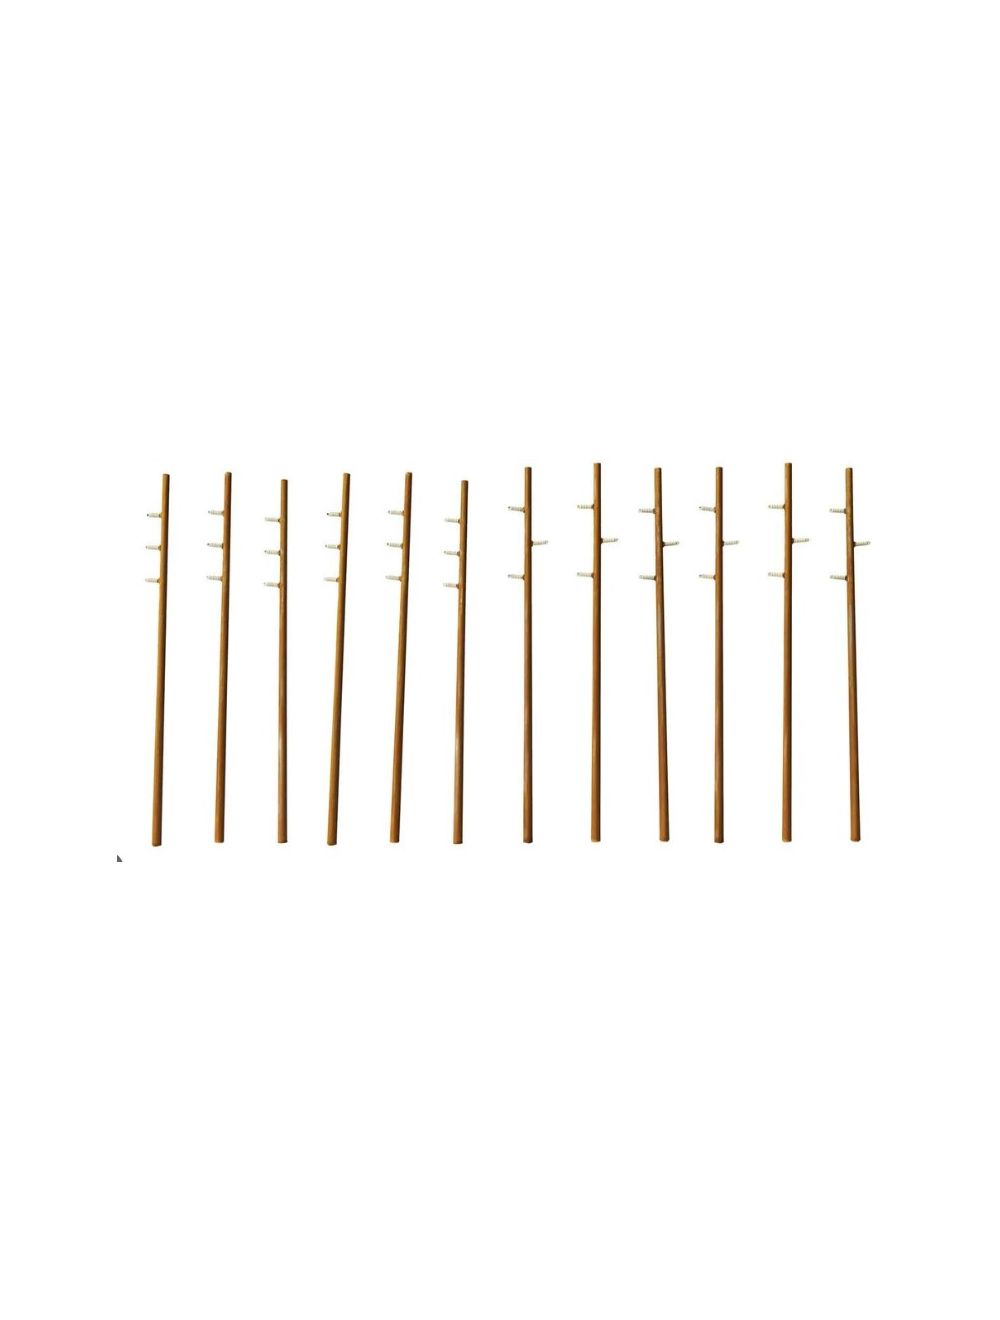 Walthers 933-4173 utility poles, HO scale